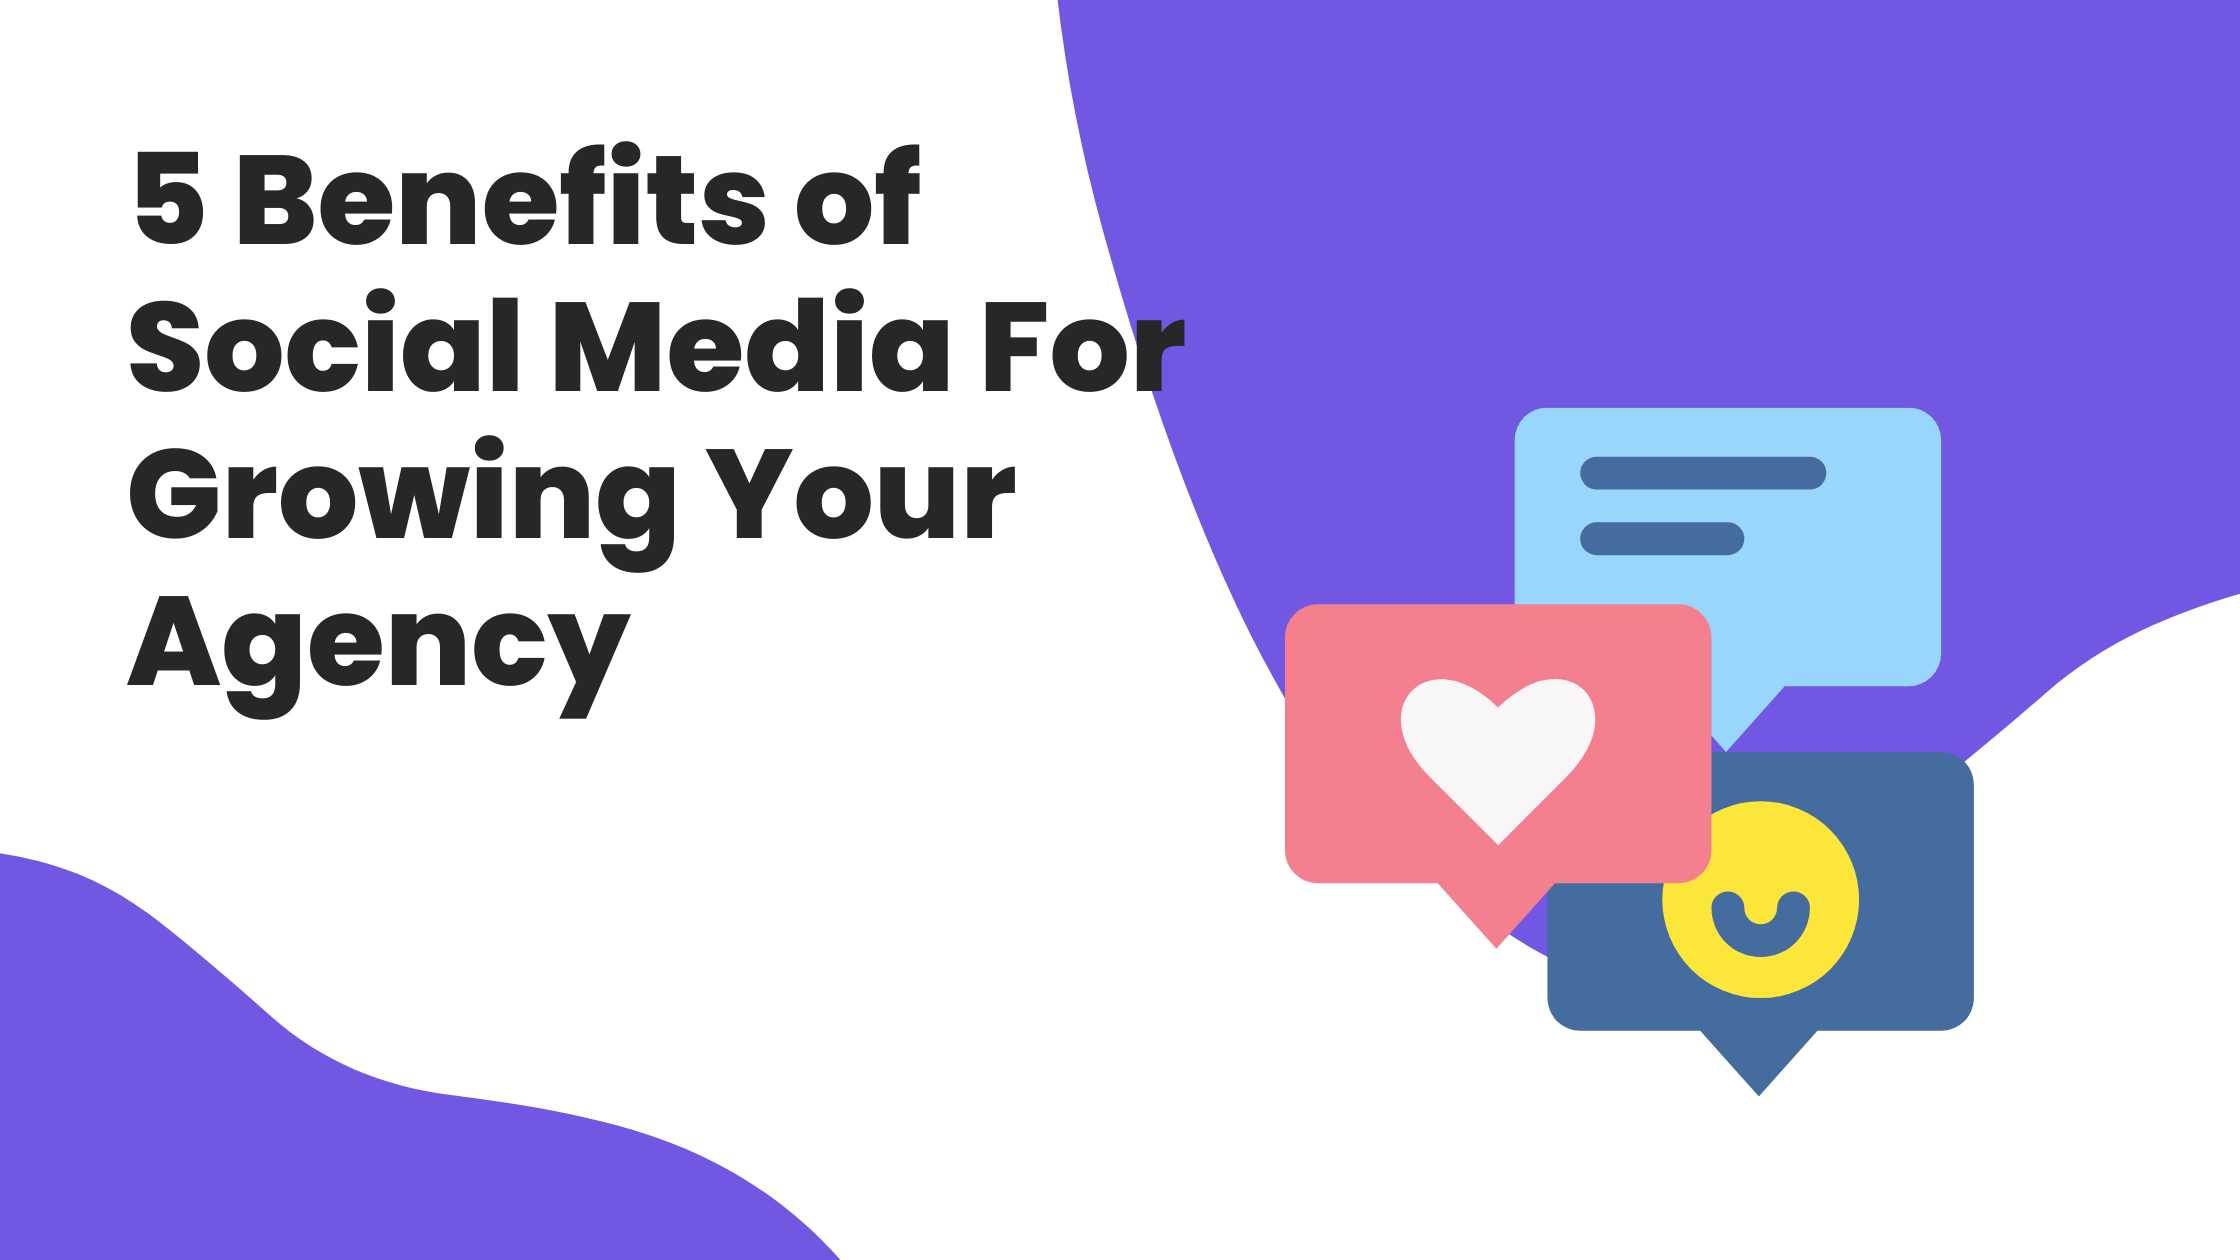 5 Benefits of Social Media For Growing Your Agency